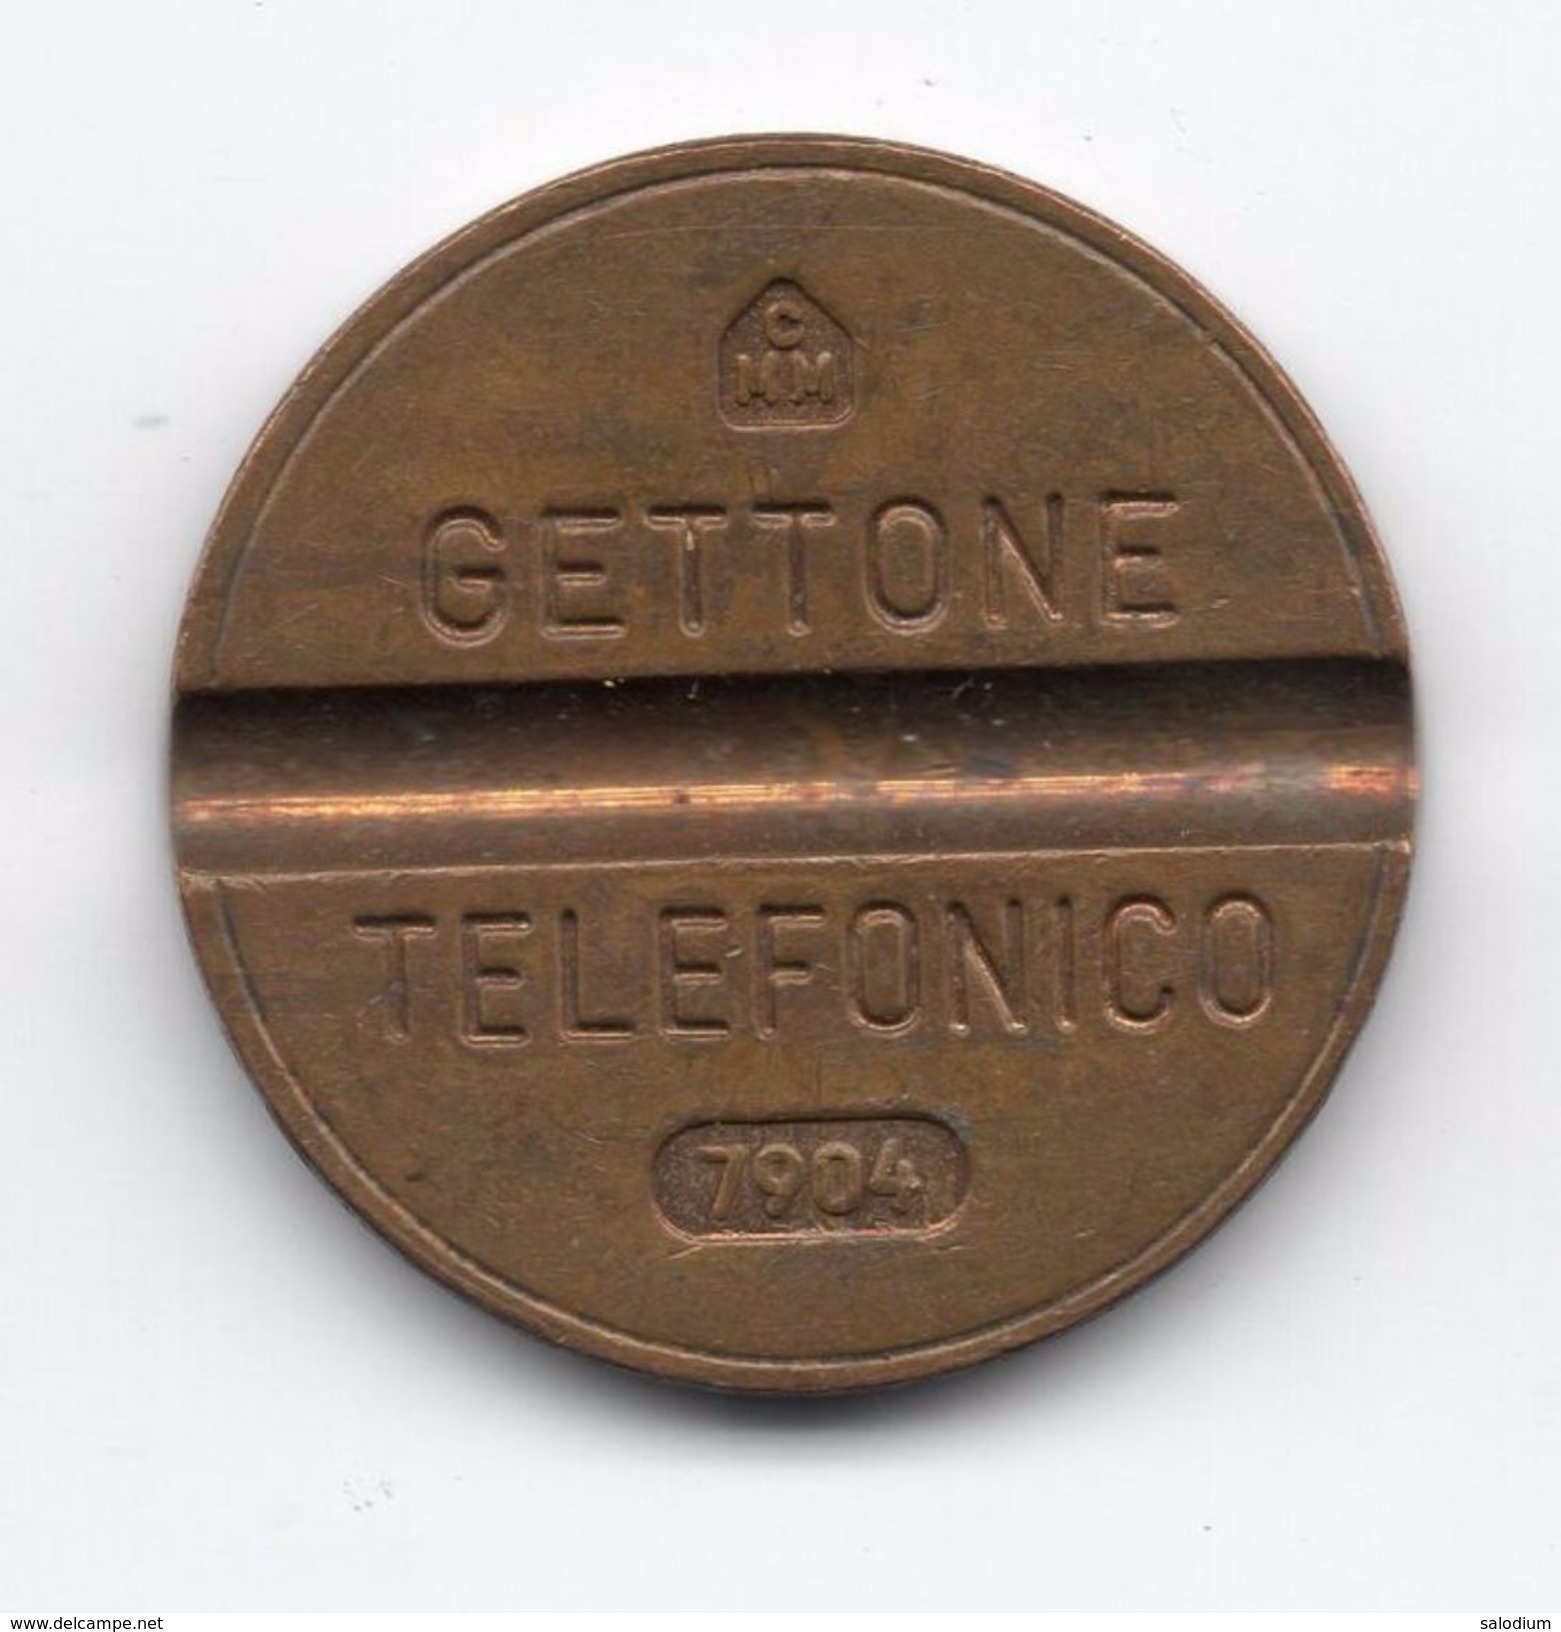 Gettone Telefonico 7904 Token Telephone - (Id-794) - Professionals/Firms